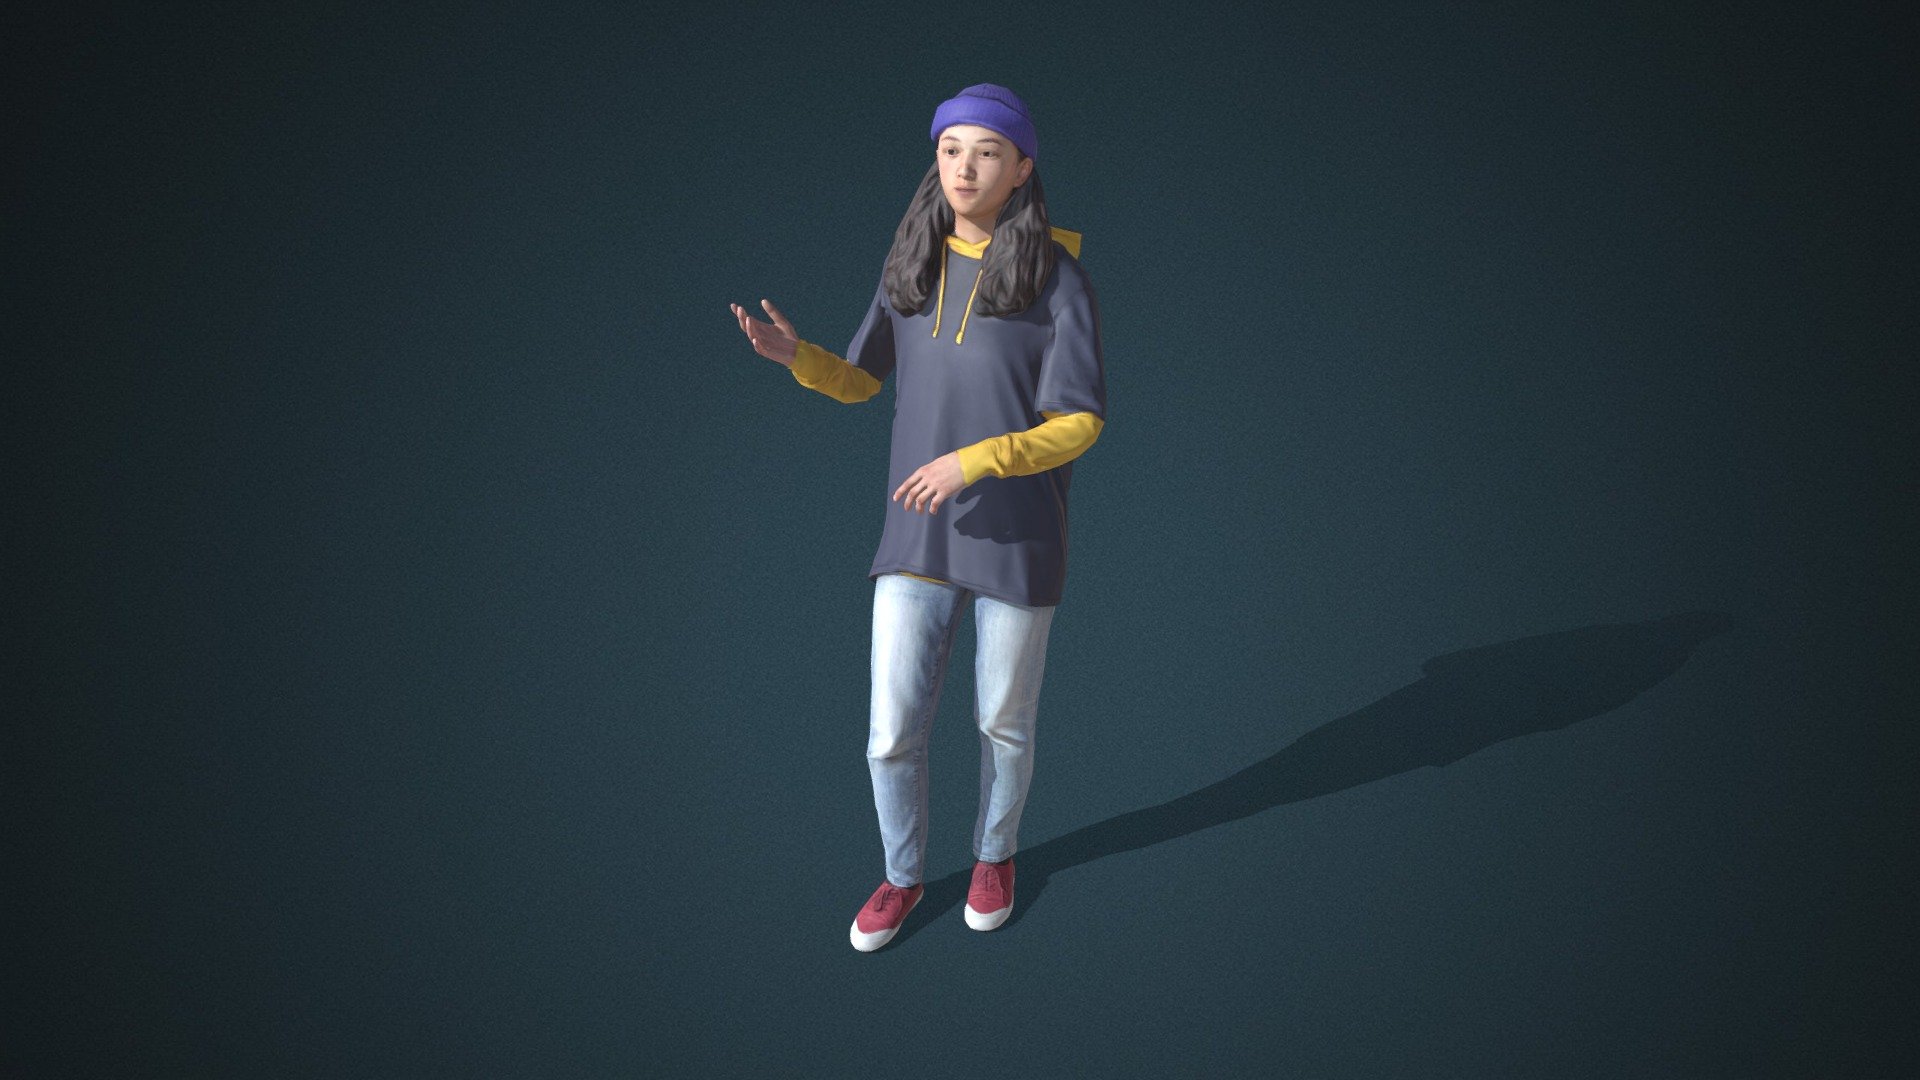 Do you like this model?  Free Download more models, motions and auto rigging tool AccuRIG (Value: $150+) on ActorCore
 

This model includes 2 mocap animations: Modern_F_Talk(D),Modern_F_Walk. Get more free motions

Design for high-performance crowd animation.

Buy full pack and Save 20%+: Young Fashion Vol.3


SPECIFICATIONS

✔ Geometry : 7K~10K Quads, one mesh

✔ Material : One material with changeable colors.

✔ Texture Resolution : 4K

✔ Shader : PBR, Diffuse, Normal, Roughness, Metallic, Opacity

✔ Rigged : Facial and Body (shoulders, fingers, toes, eyeballs, jaw)

✔ Blendshape : 122 for facial expressions and lipsync

✔ Compatible with iClone AccuLips, Facial ExPlus, and traditional lip-sync.


About Reallusion ActorCore

ActorCore offers the highest quality 3D asset libraries for mocap motions and animated 3D humans for crowd rendering 3d model